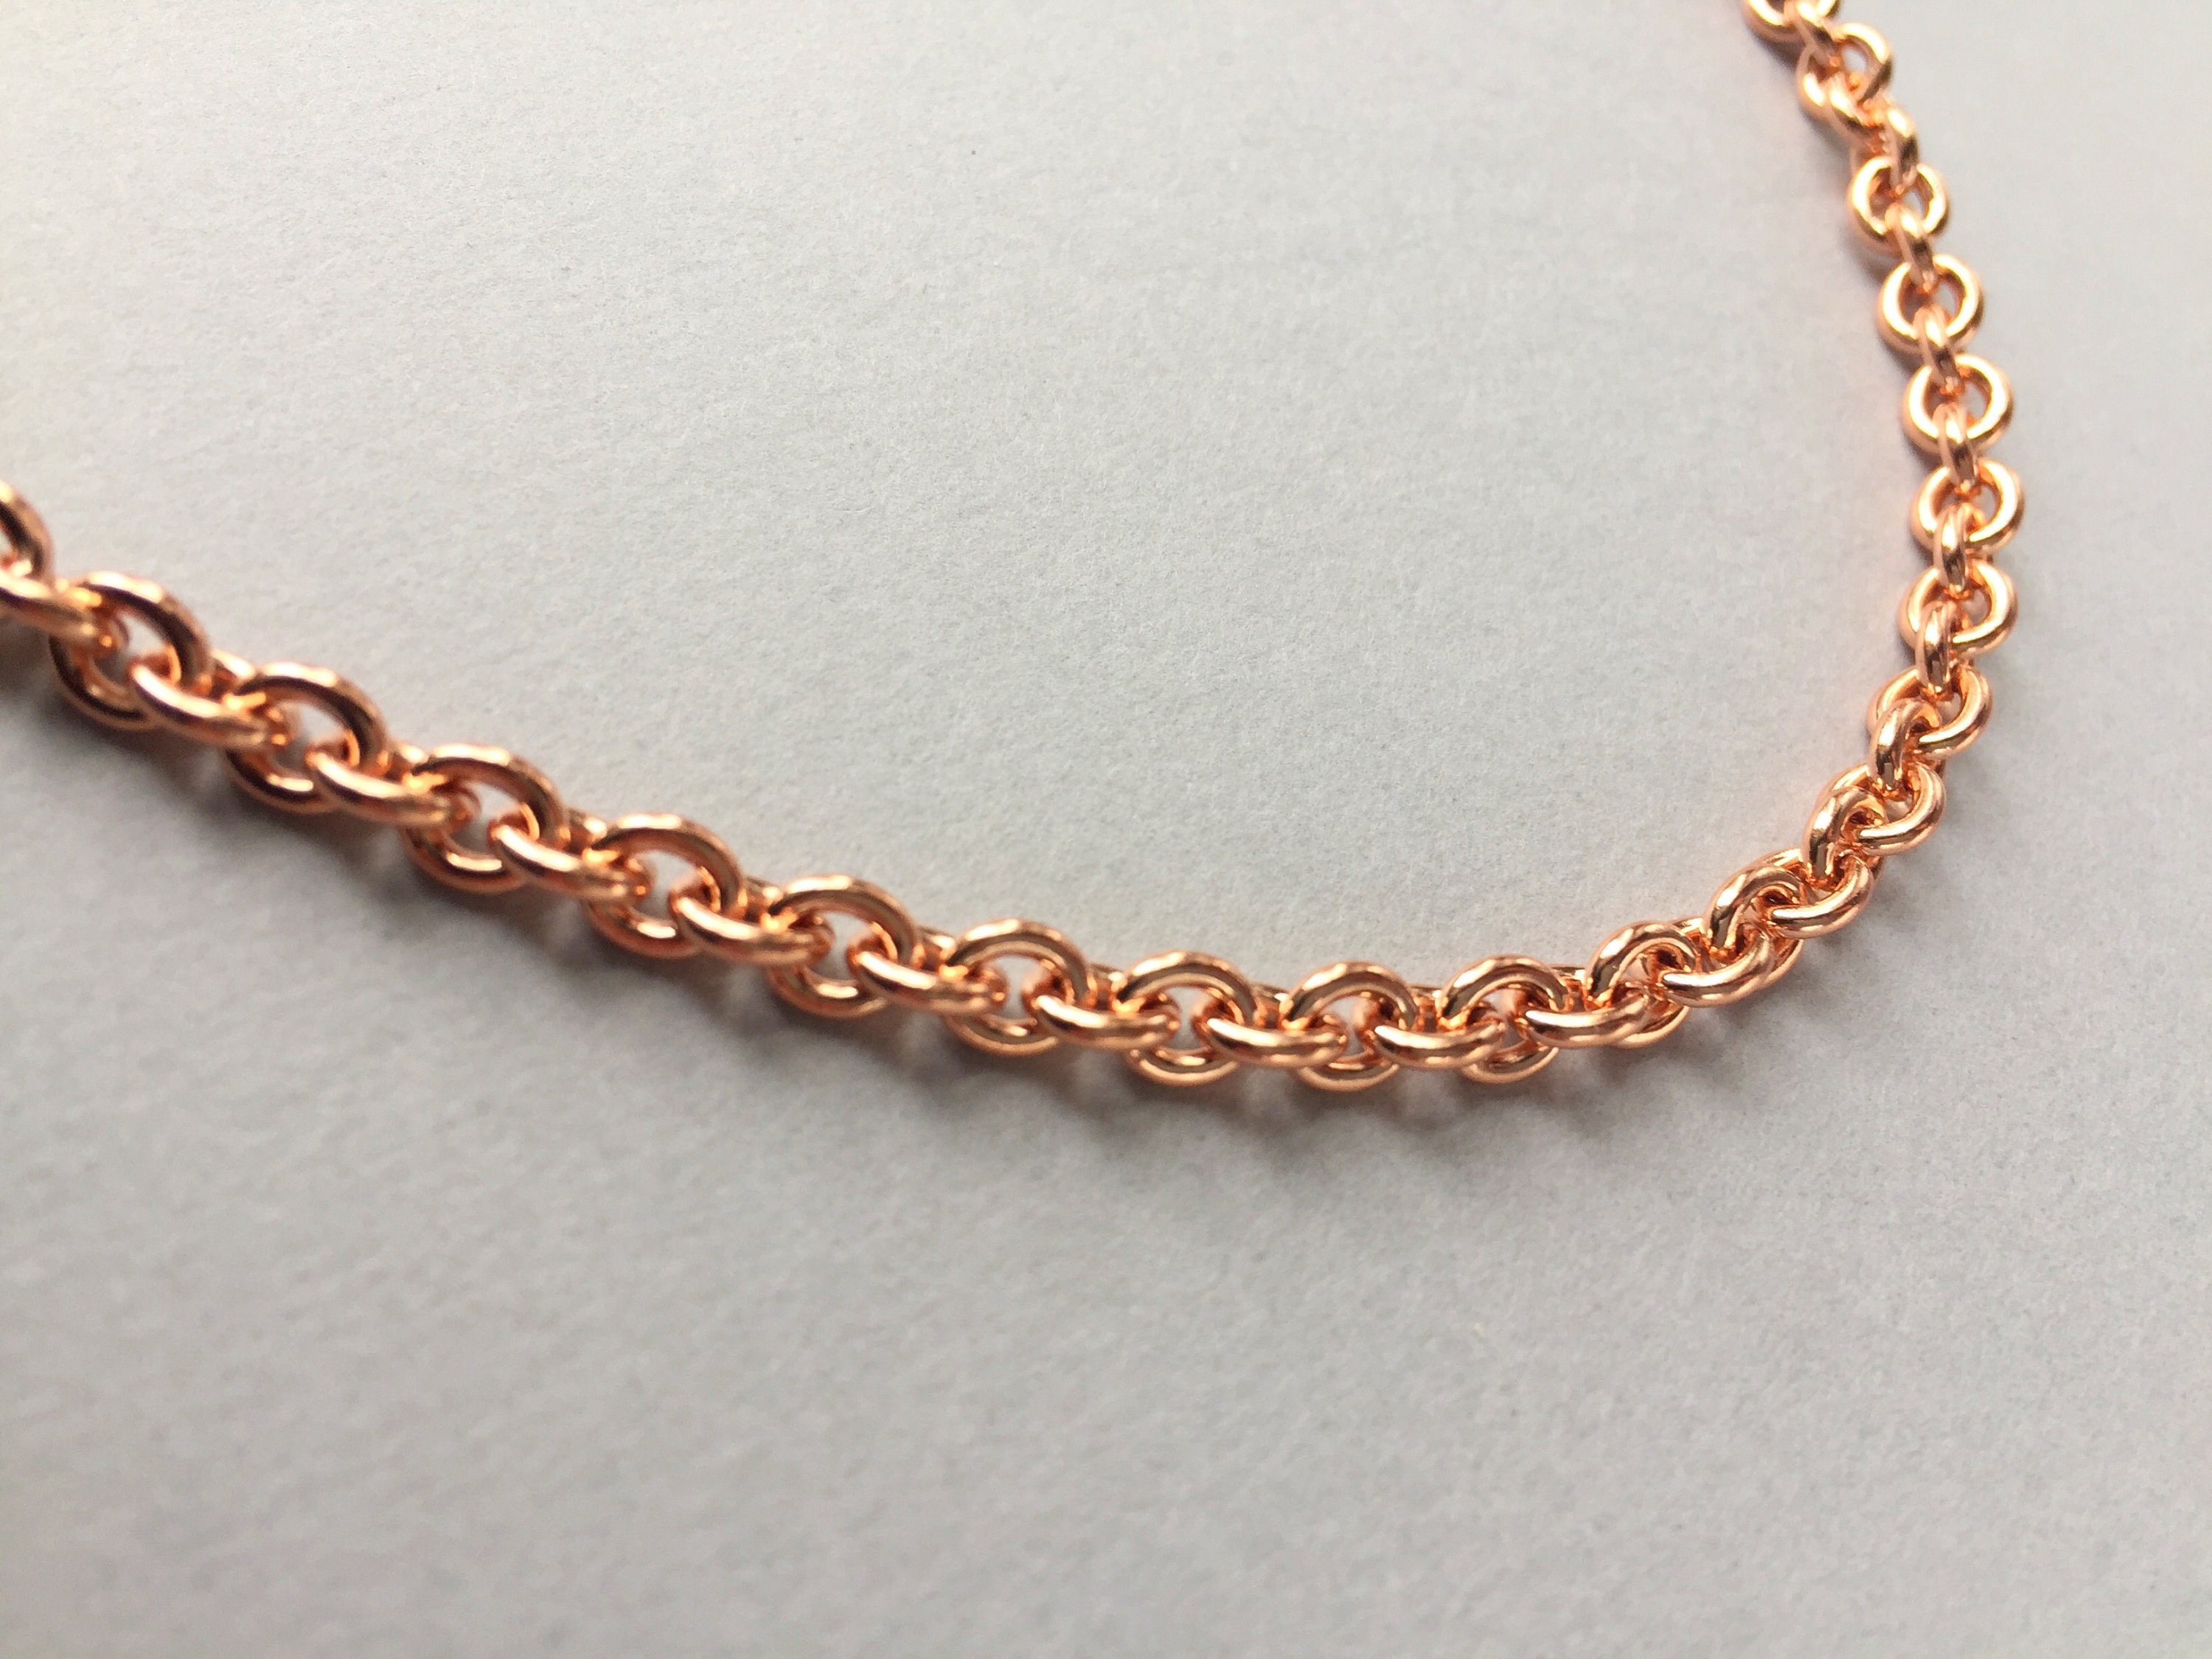 Copper Copper Chain, Chain, Copper-Plated Copper, 5x4mm Curved Oval Link, 18 Inches with Lobster Claw Clasp.